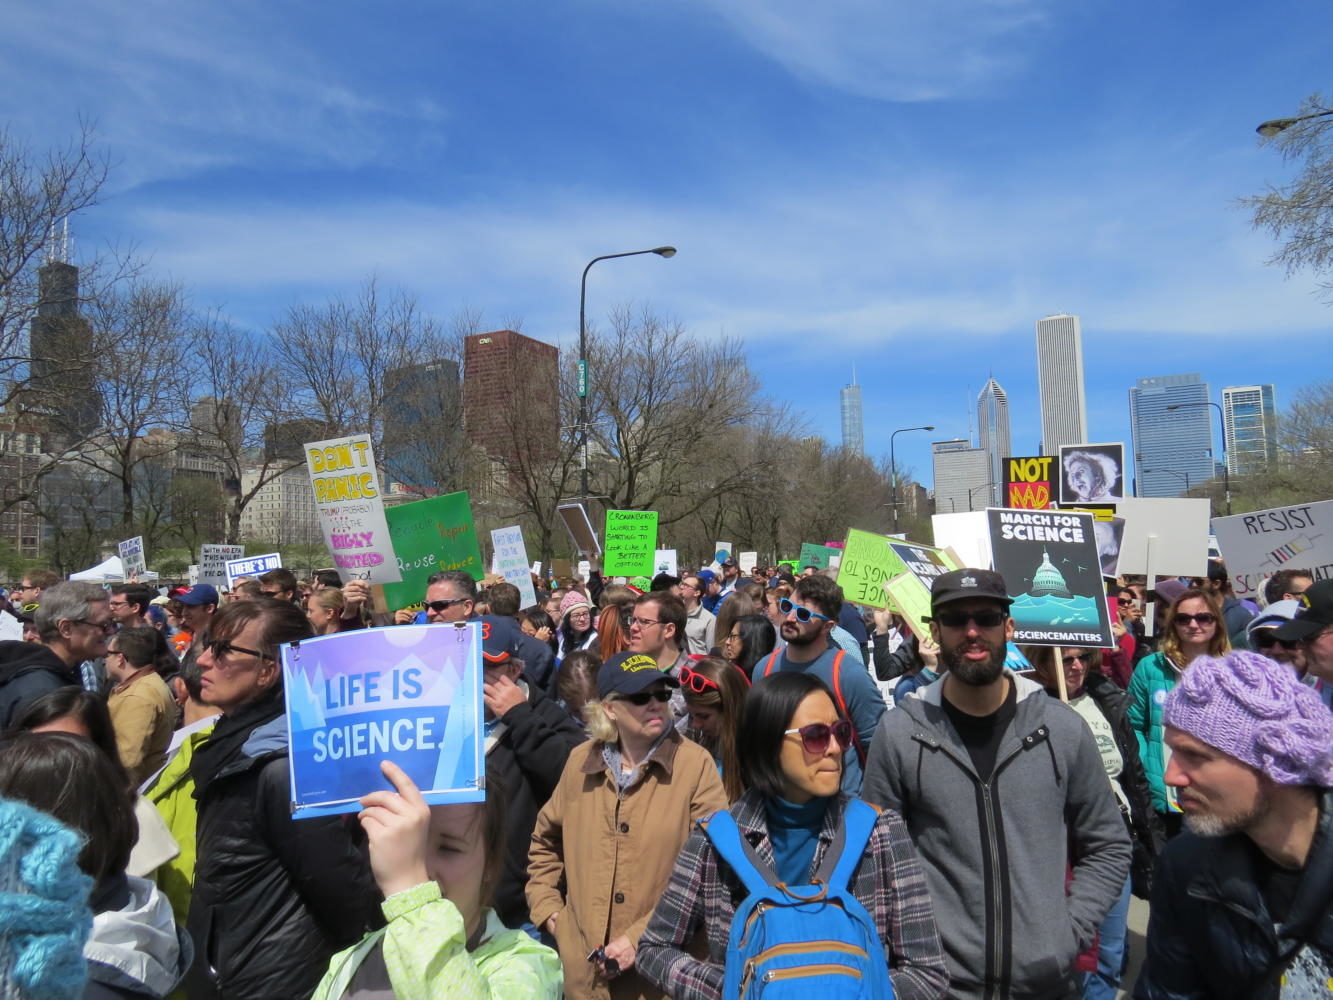 Chicago comes together to march for science